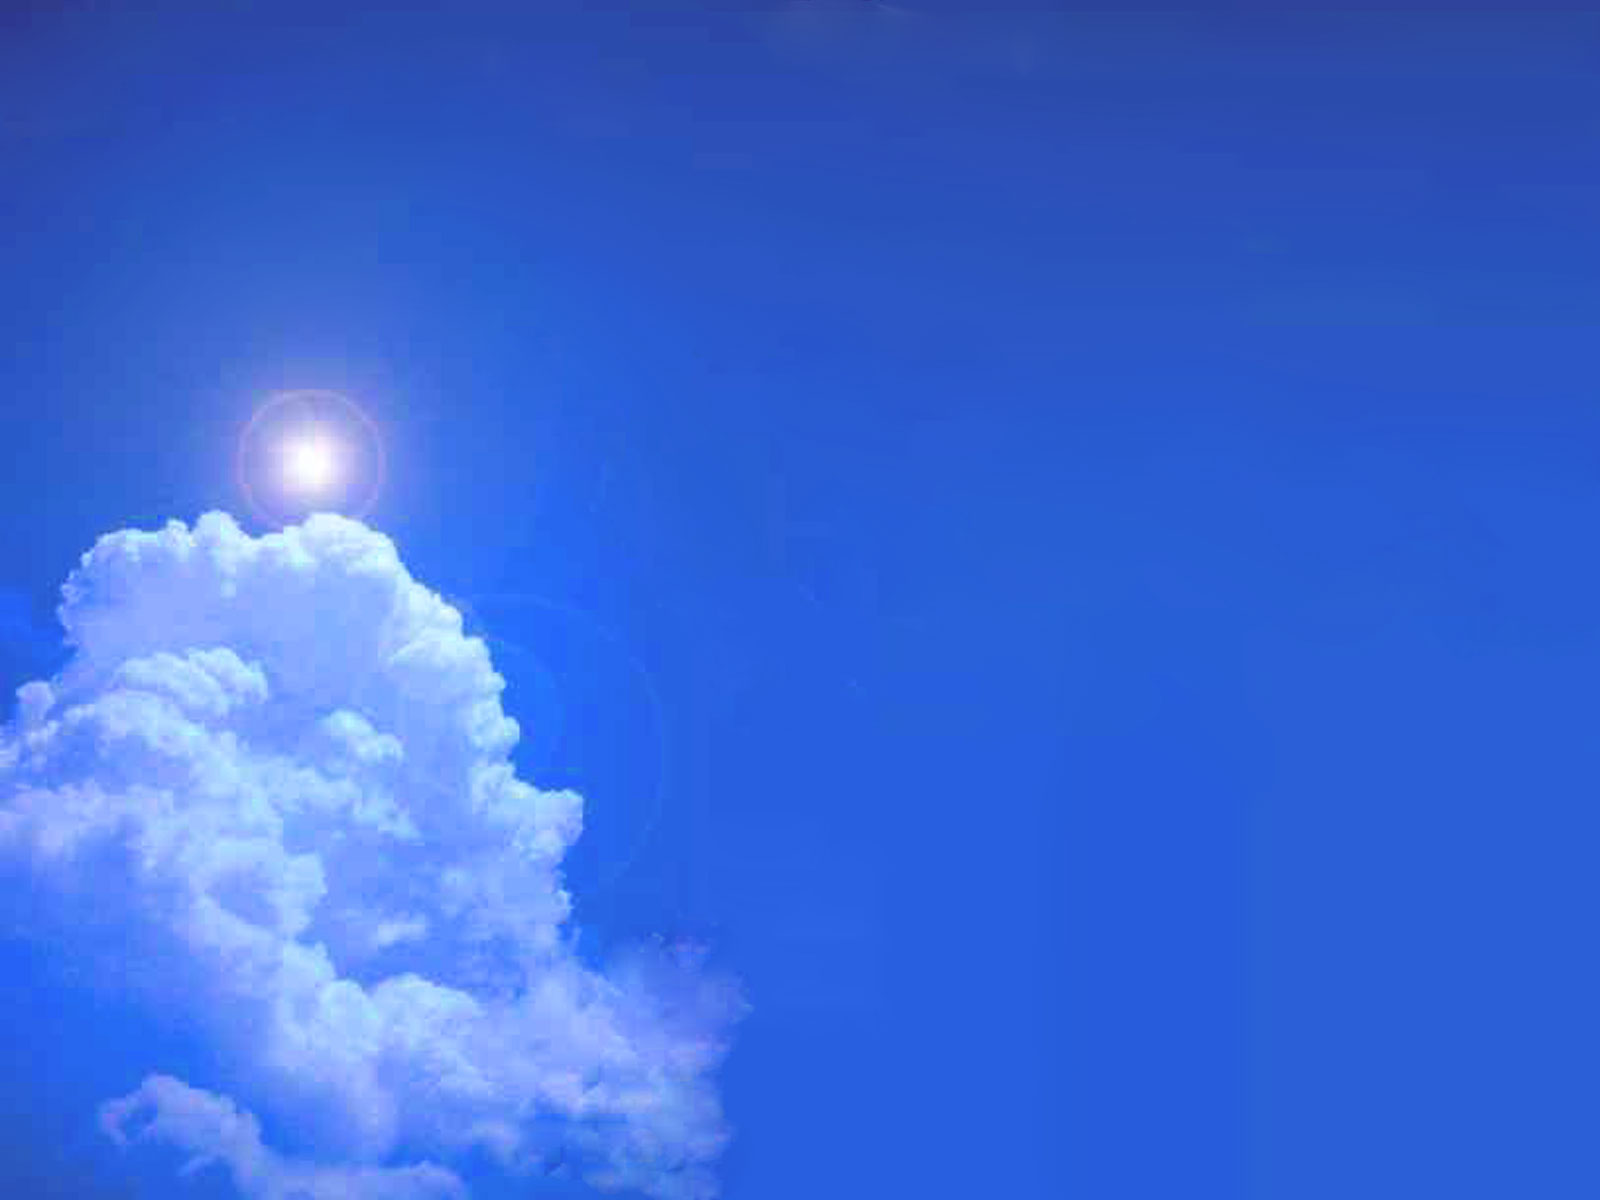 powerpoint wallpaper background,sky,blue,cloud,daytime,atmosphere